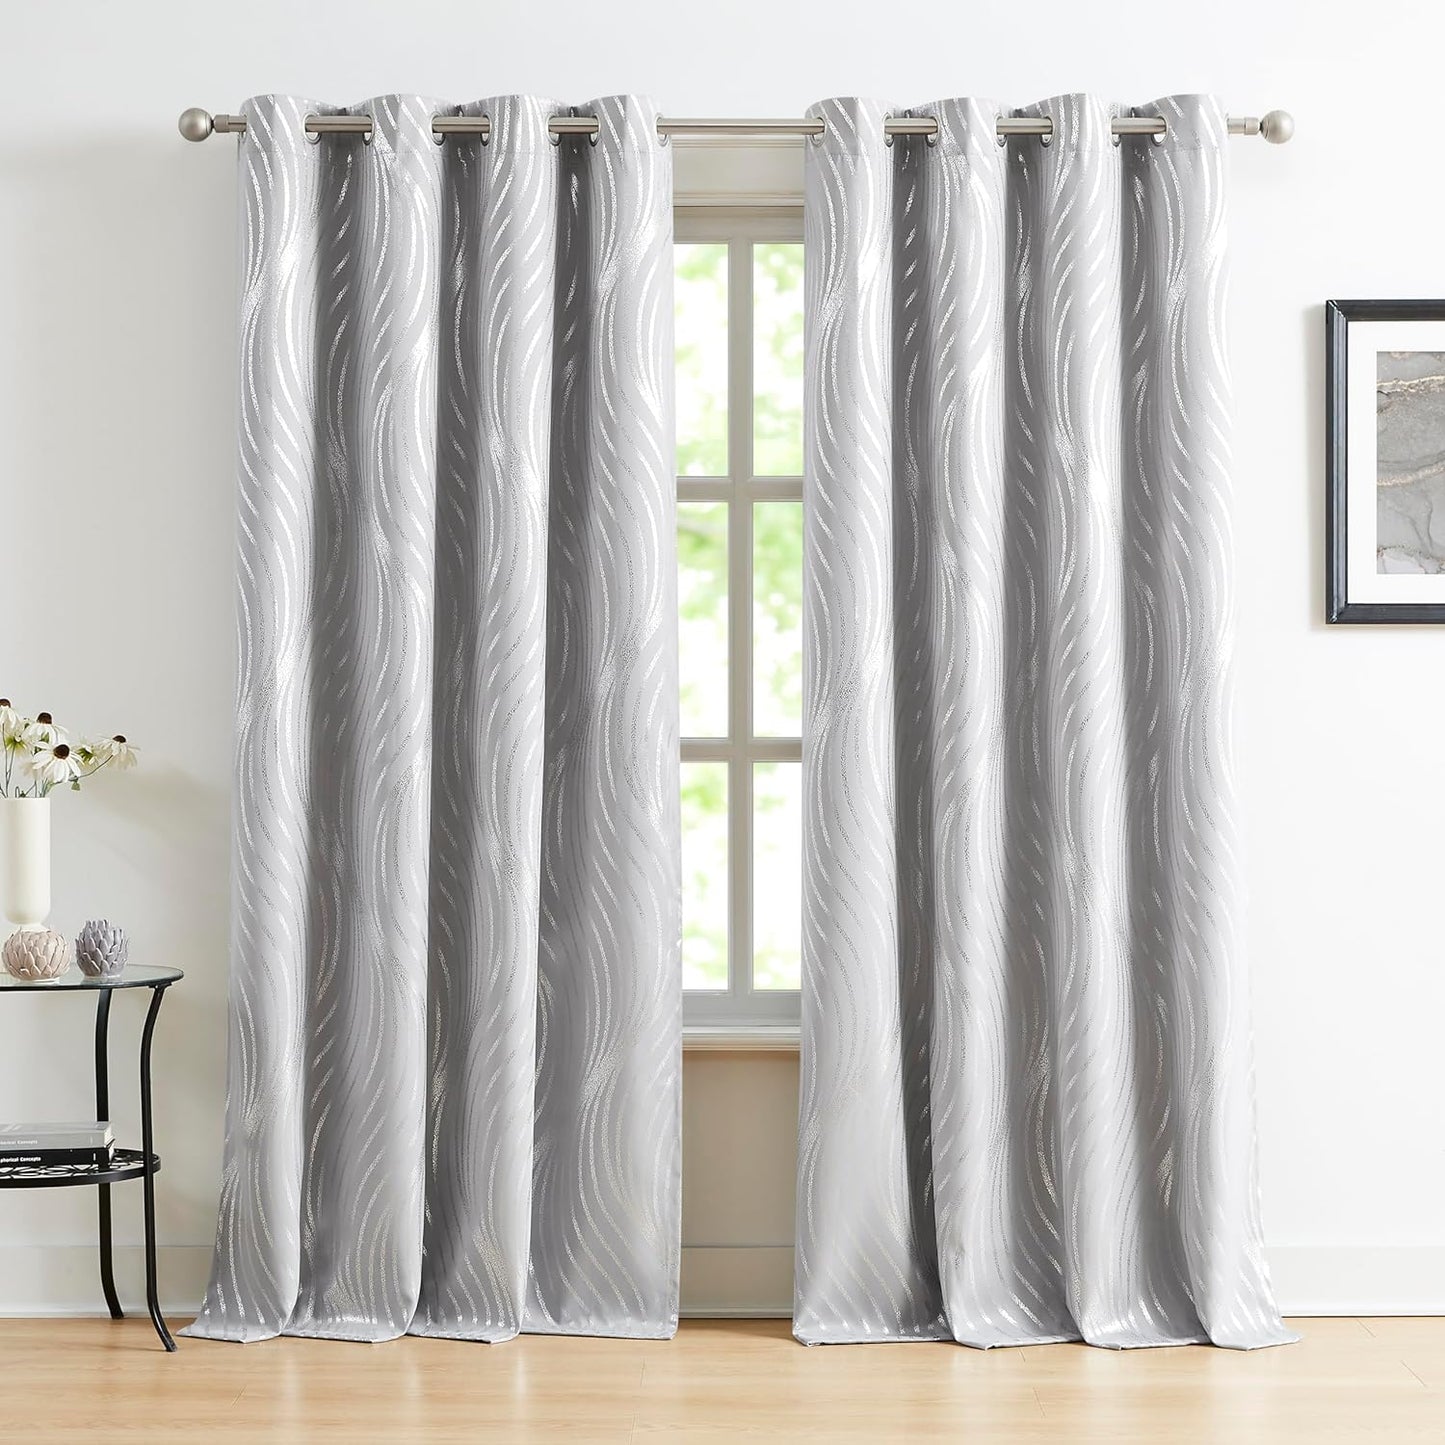 Xwincel Full Blackout Curtains with Silver Metallic Wave Print,84 Inches Long Thermal Insulated Sound Proof Window Treatments for Living Room Bedroom, Grommets Top Design,White,52W X 84L,2 Panel Sets  Xwincel Grey 52"X84"X2 